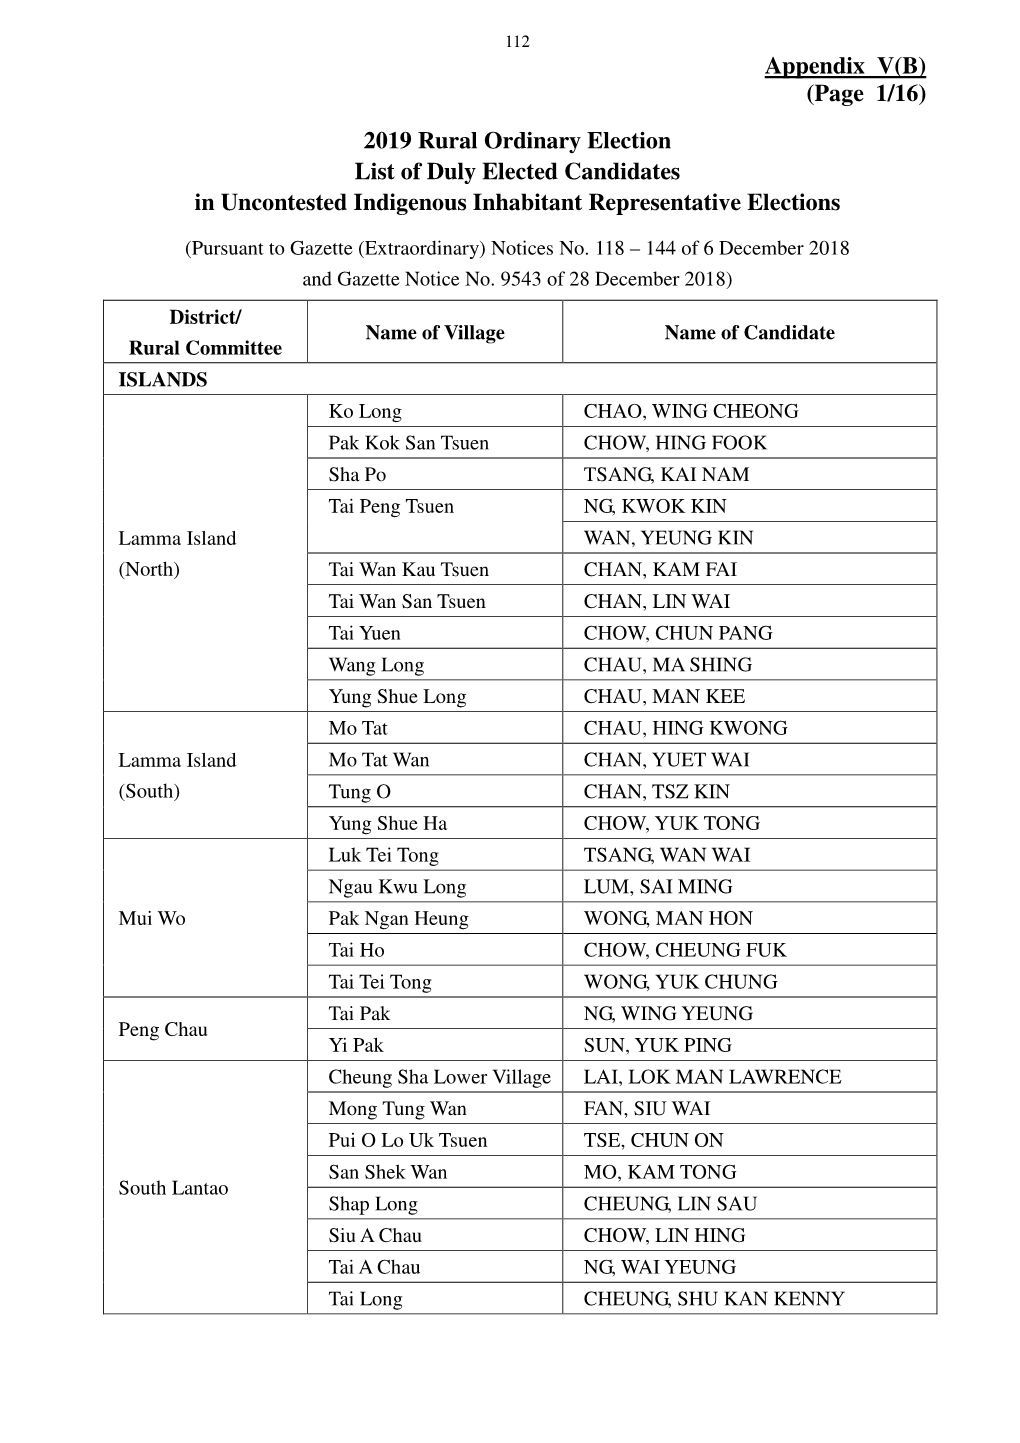 Appendix V(B) (Page 1/16) 2019 Rural Ordinary Election List of Duly Elected Candidates in Uncontested Indigenous Inhabitant Representative Elections